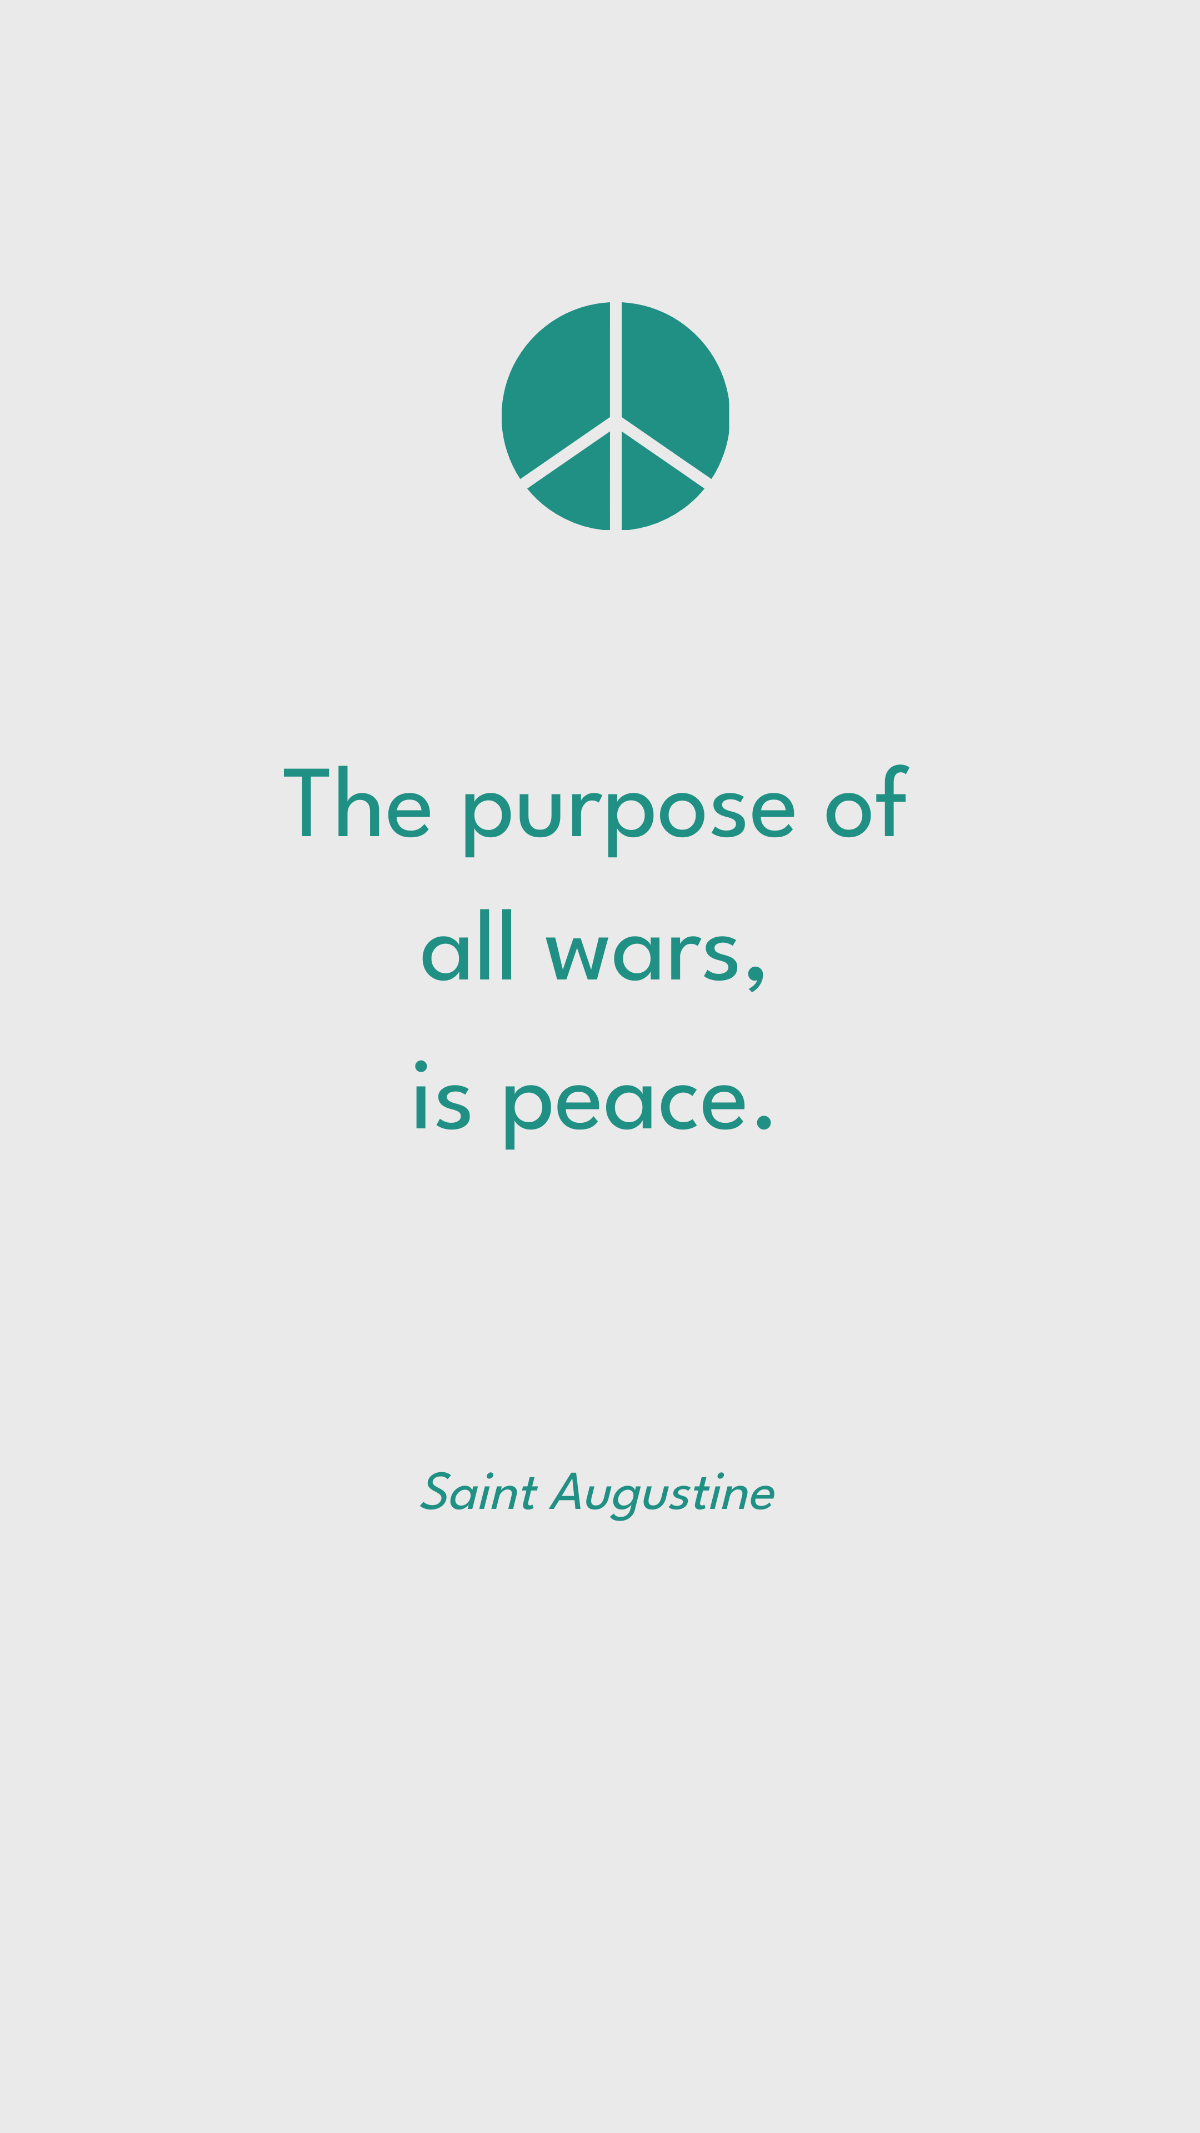 Saint Augustine - The purpose of all wars, is peace. Template